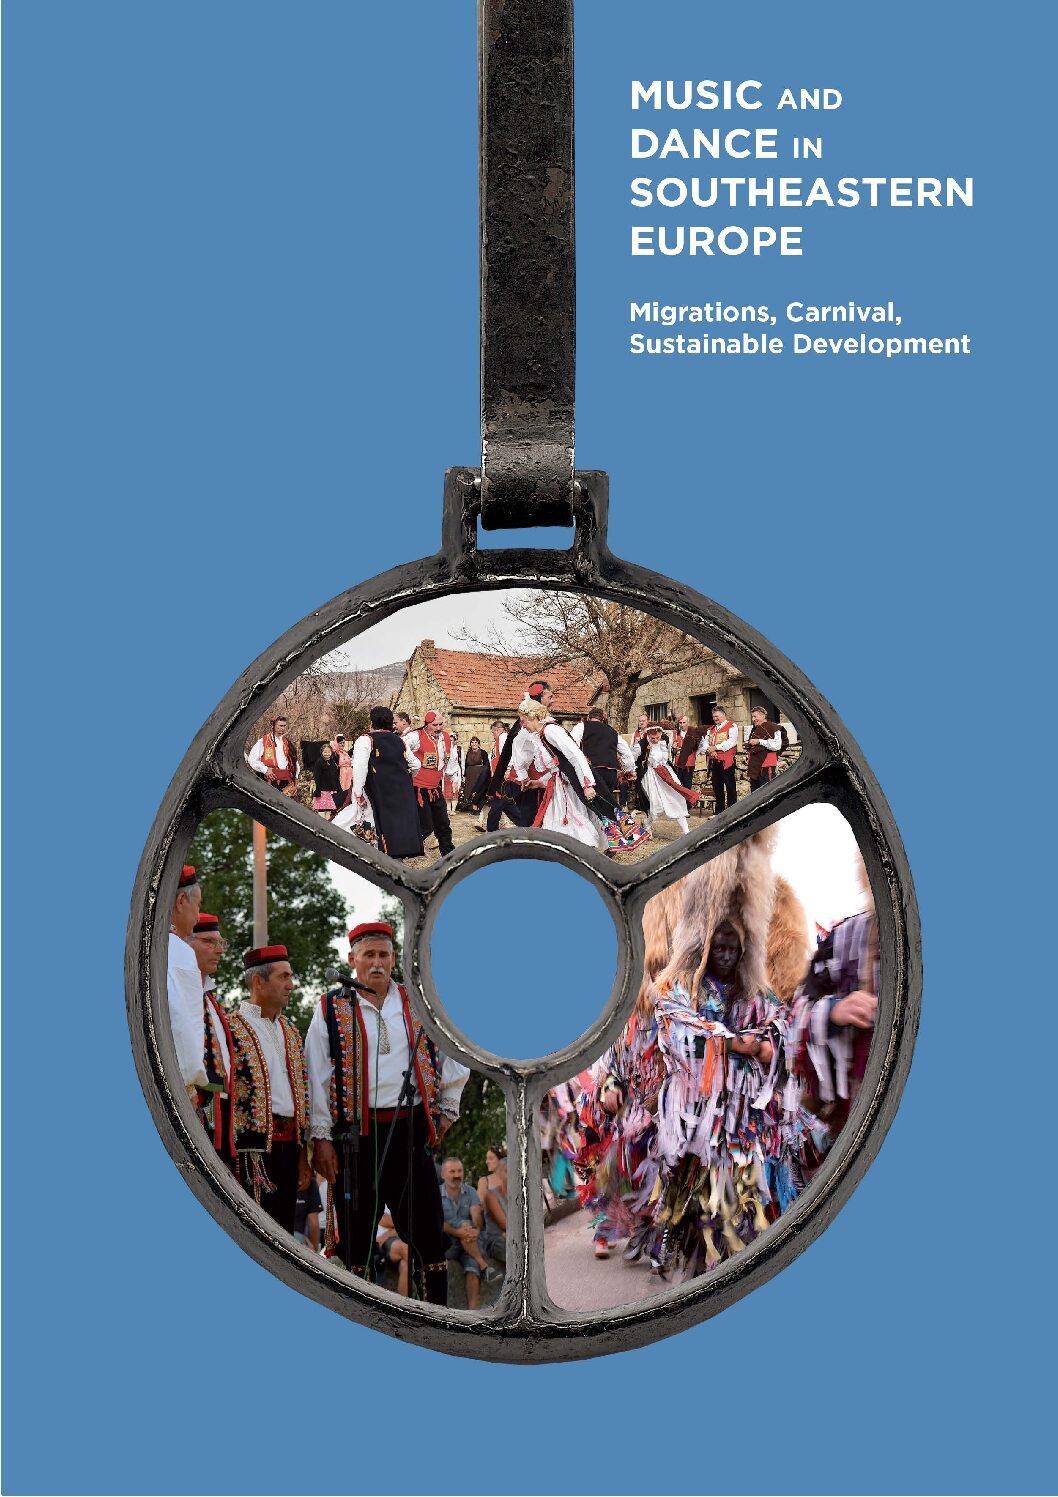 Music and Dance in Southeastern Europe: Migrations, Carnival, Sustainable Development